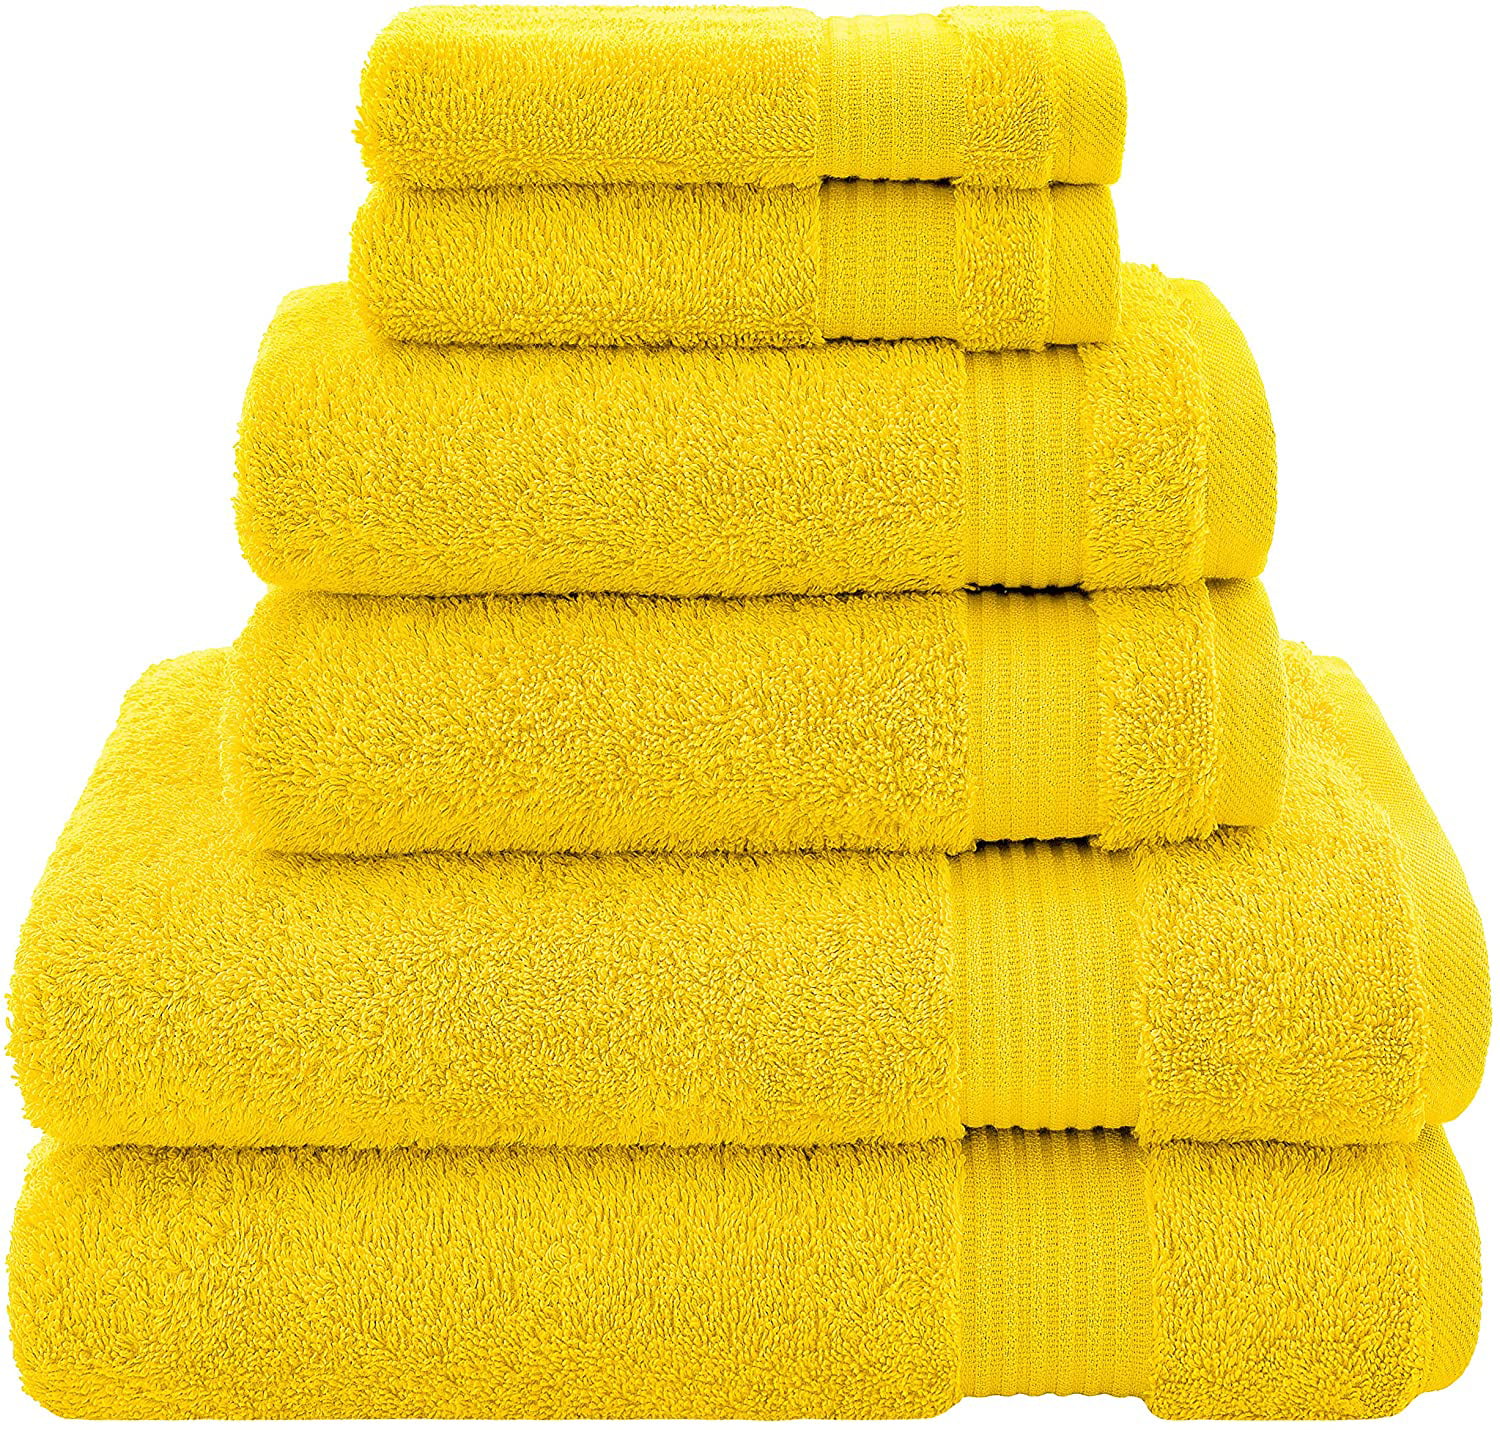 100% Cotton towel soft feel by Homes Paradise Yellow  Colour new Pack of 2 